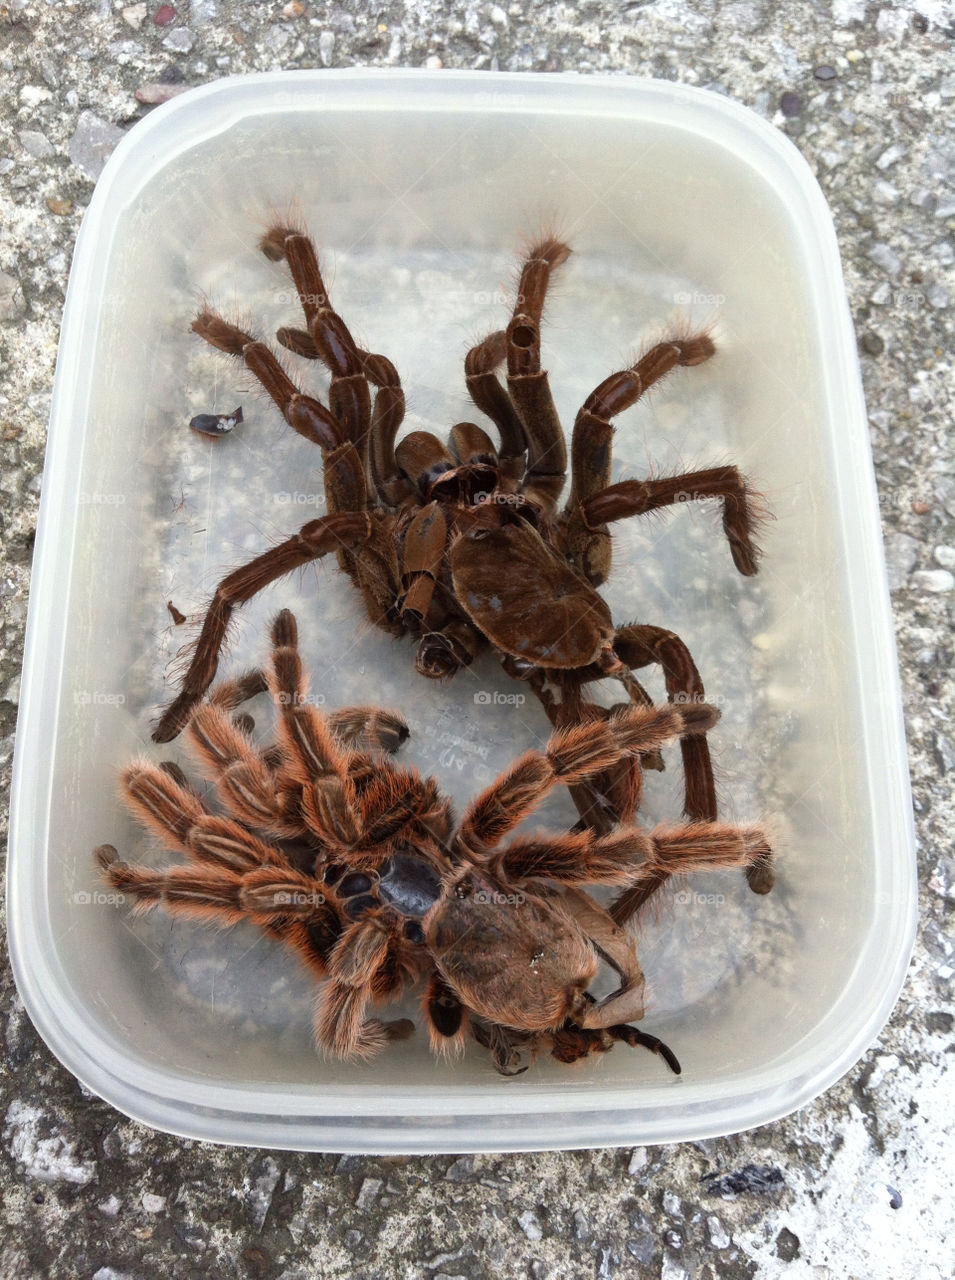 spider skins by zeewolf. My friends spiders shed their skins and this is what was left behind 